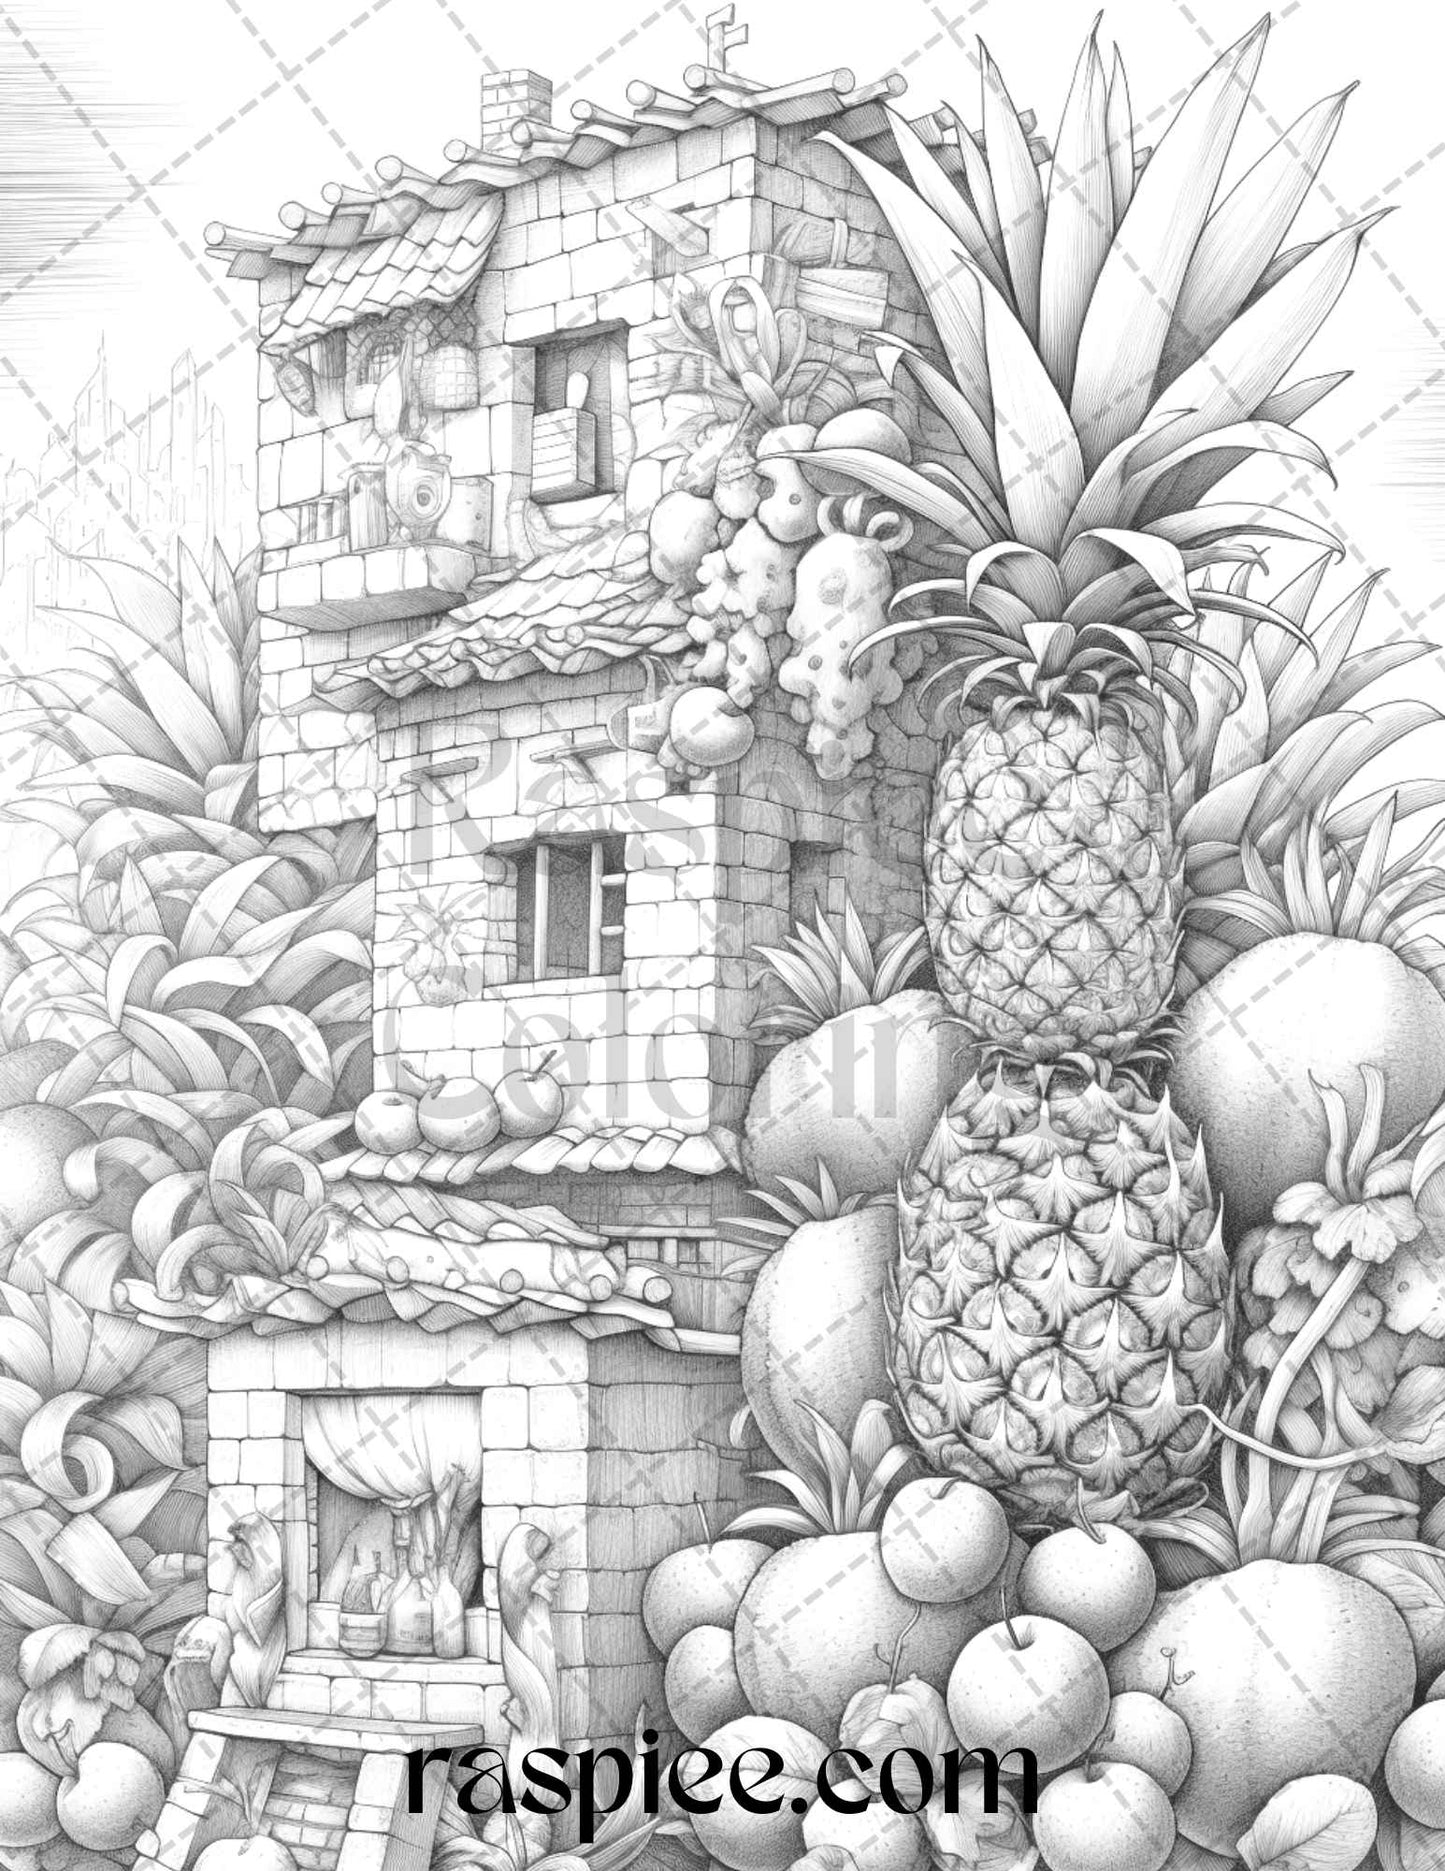 50 Pineapple Houses Grayscale Coloring Pages Printable for Adults, PDF File Instant Download - raspiee